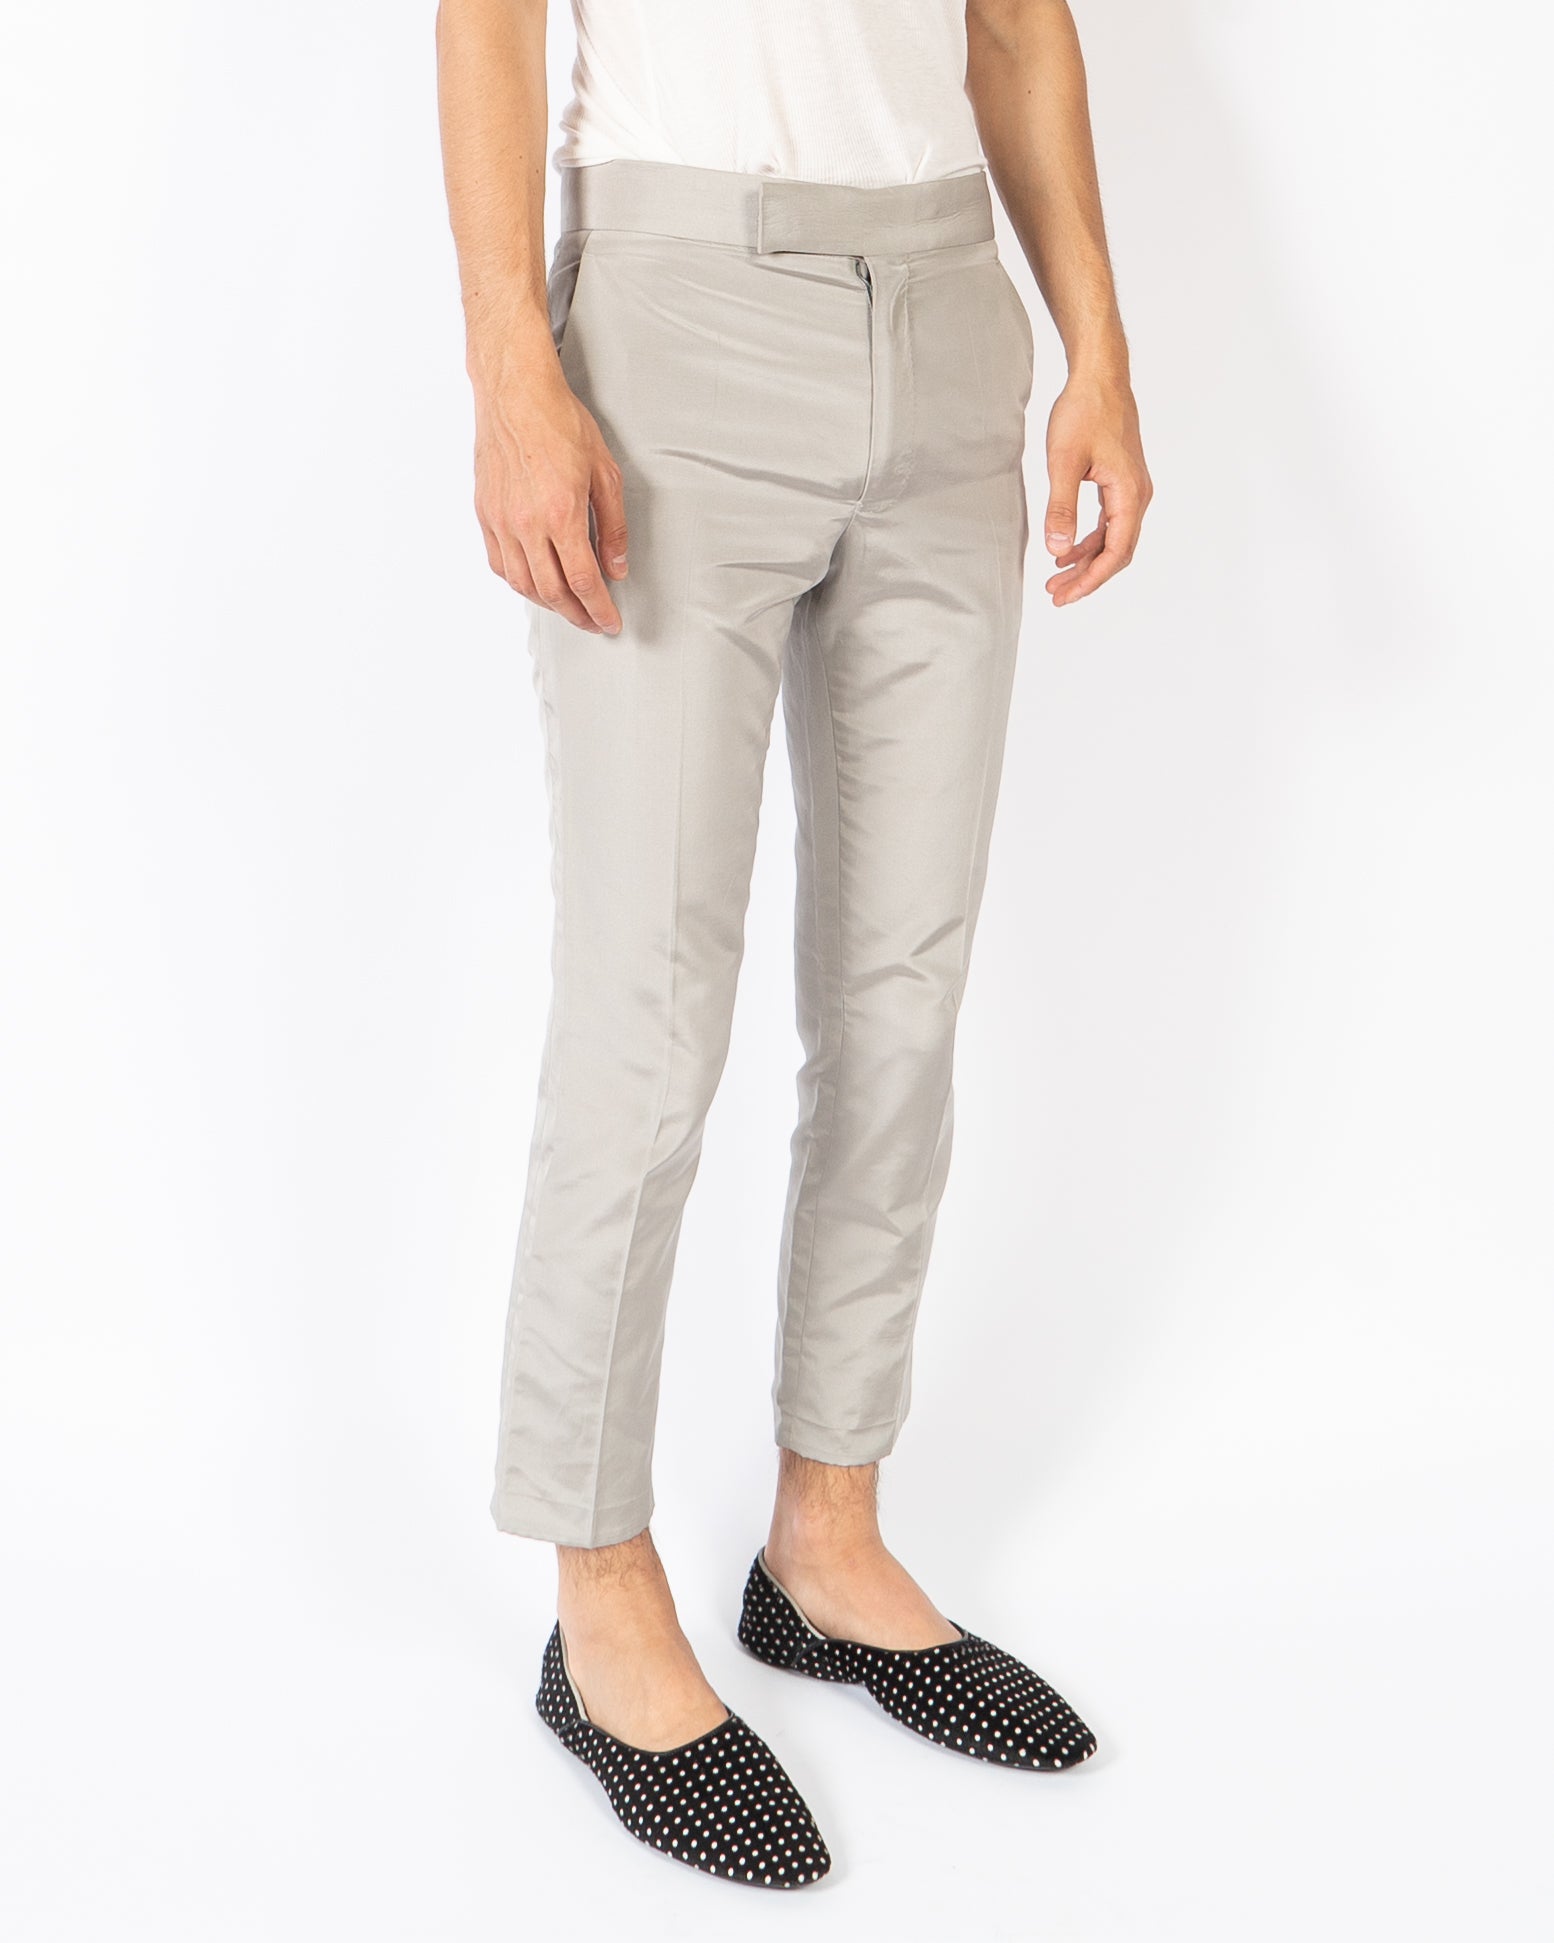 SS20 Cropped Grey Commodore Trousers